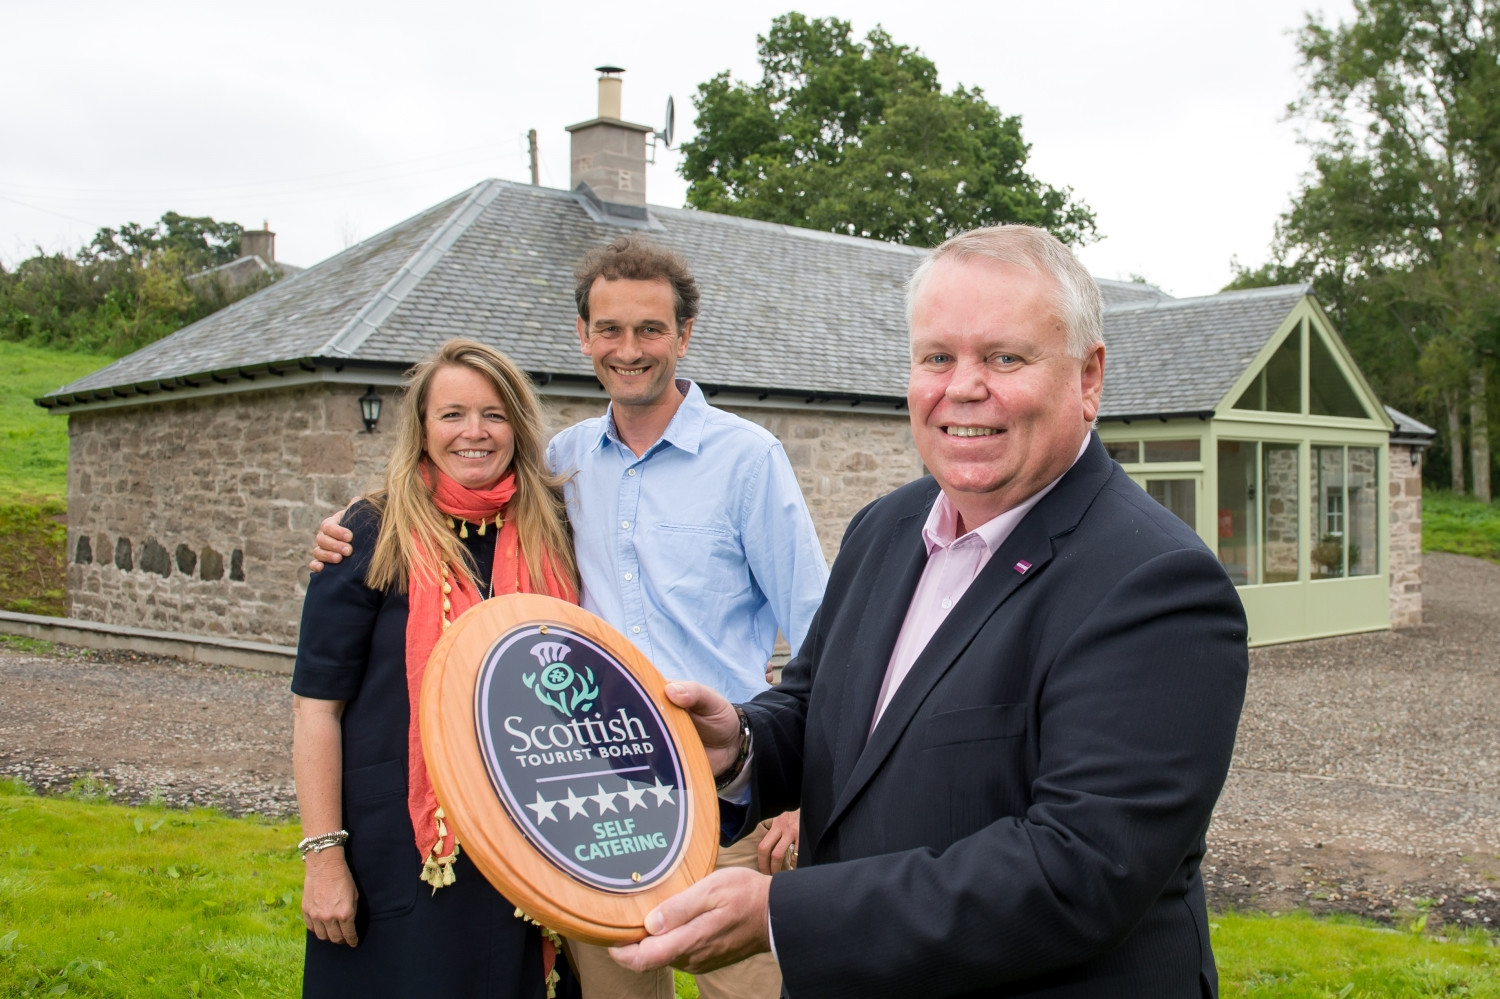 Earn River Cottage in Dupplin, Perth presented with VisitScotland’s Five Star Quality Assurance Award 